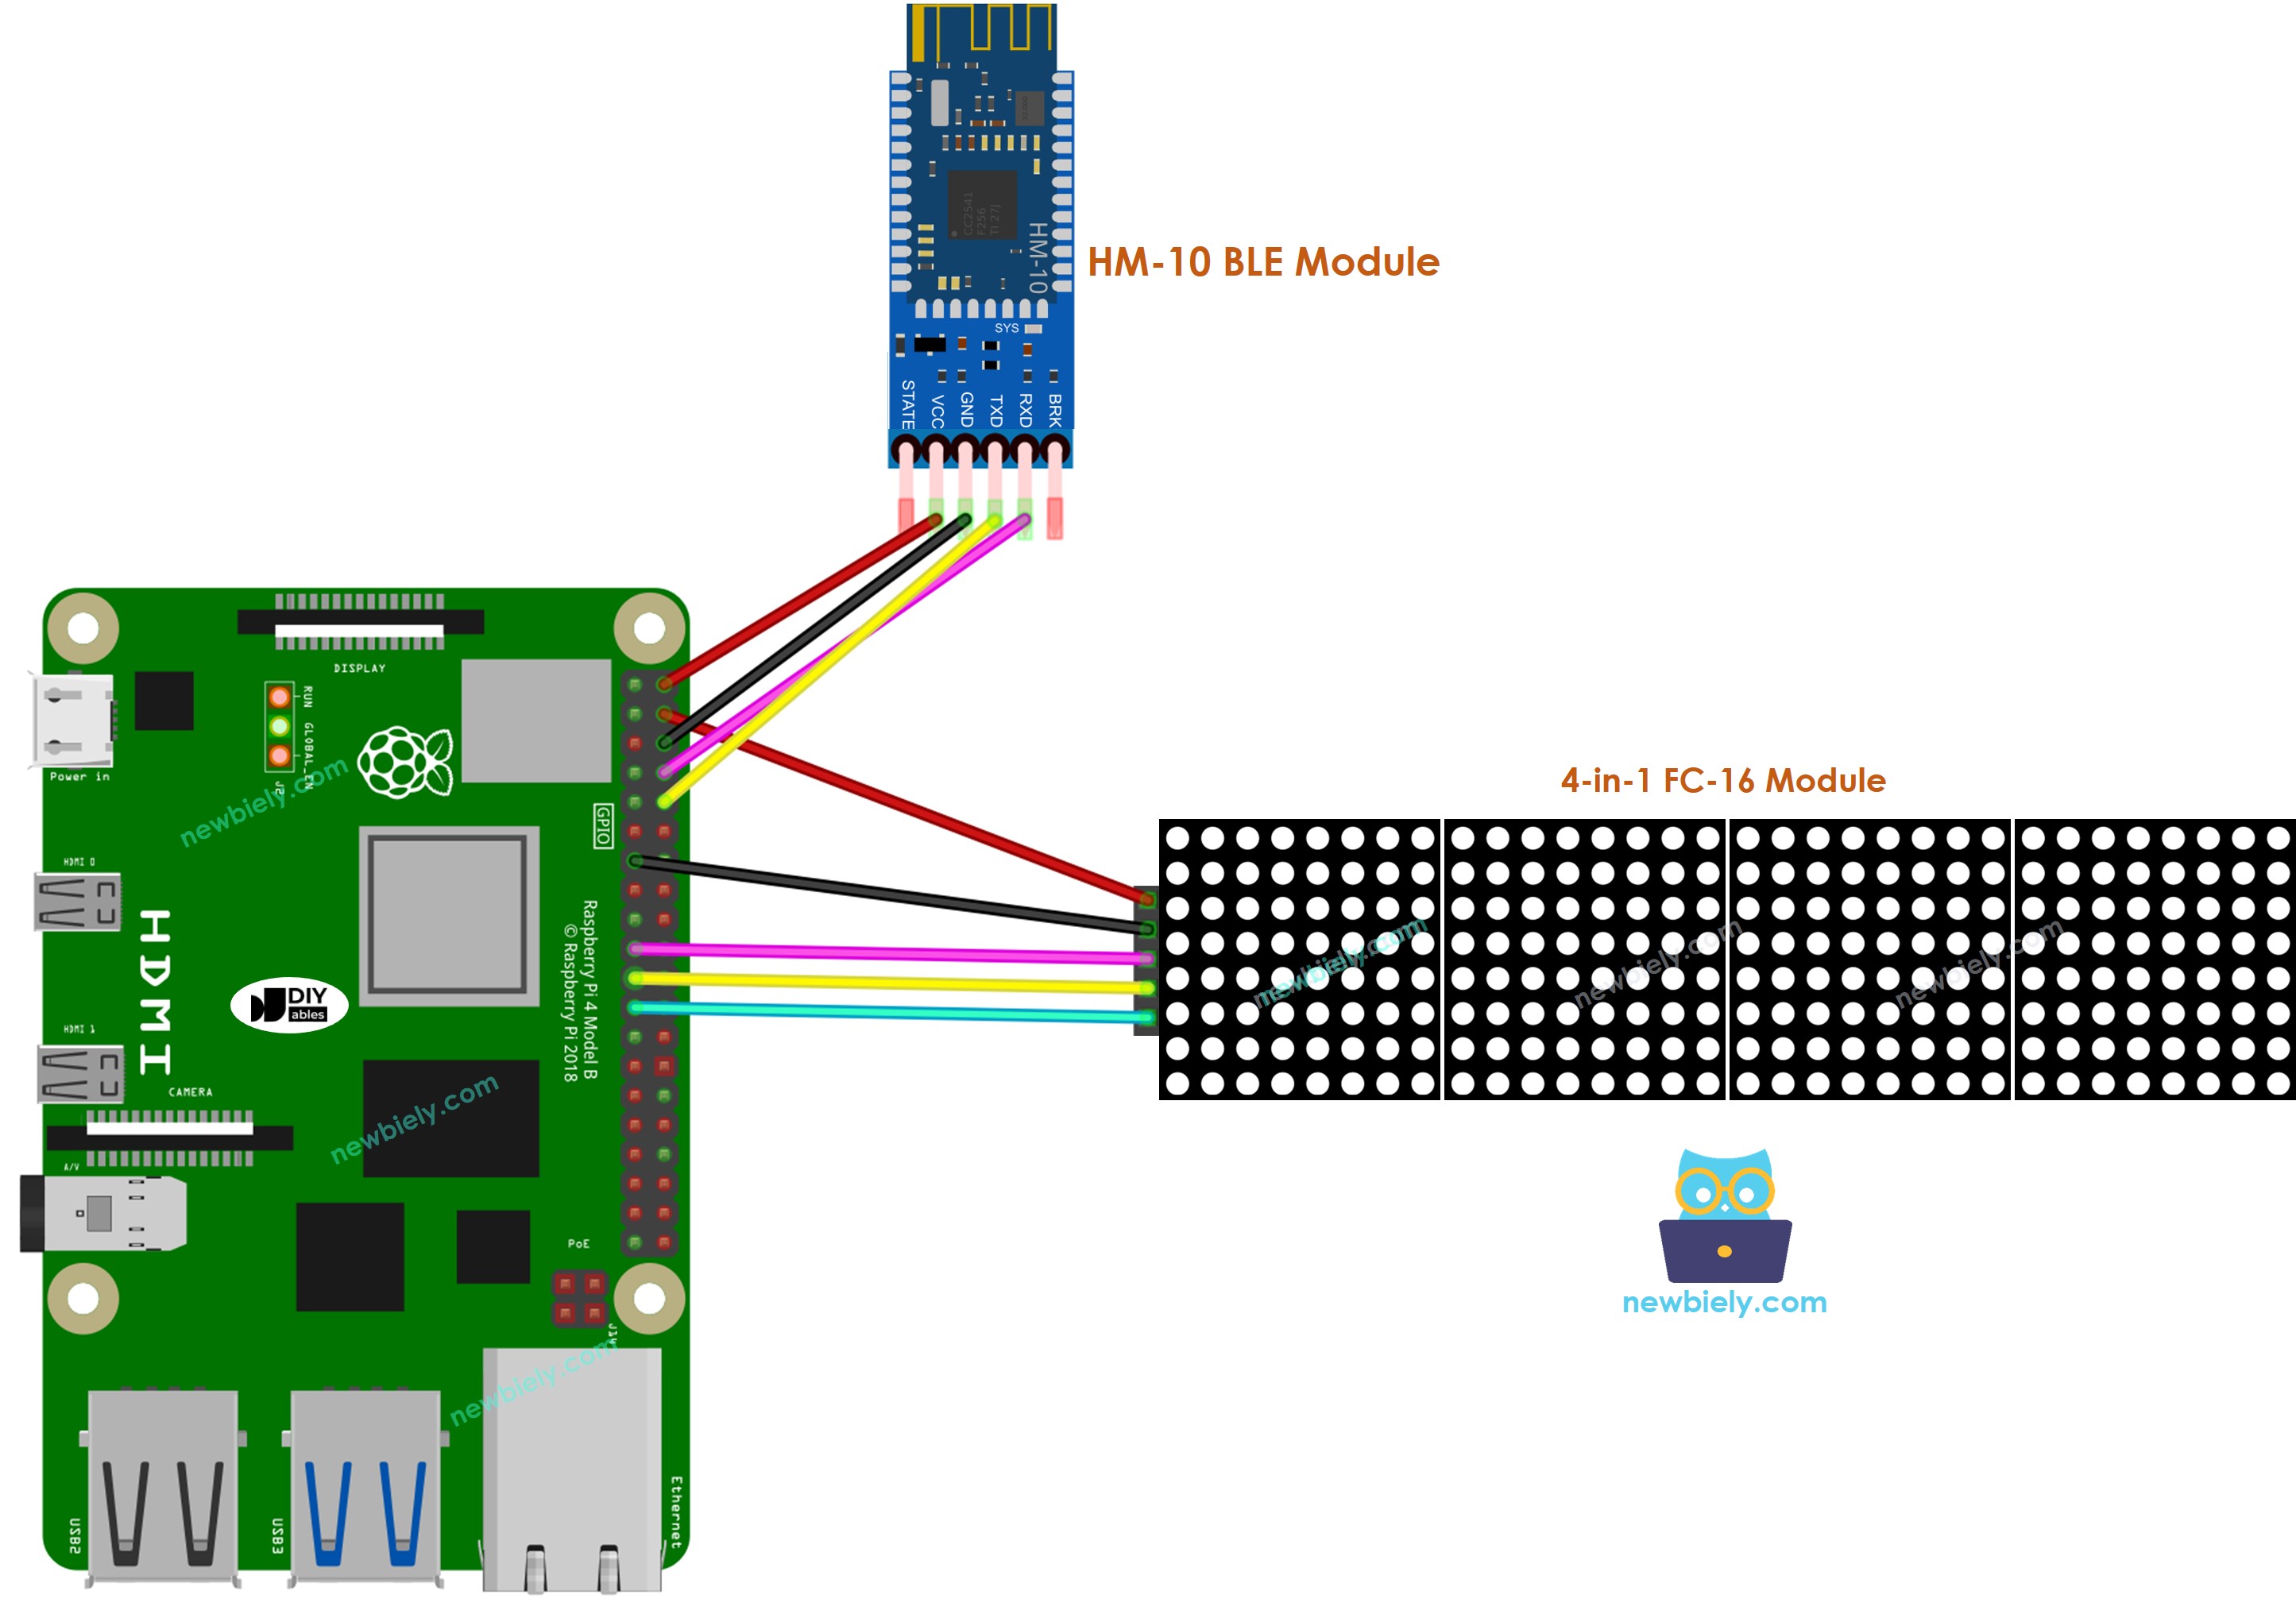 The wiring diagram between Raspberry Pi and HM-10 BLE Module LED matrix